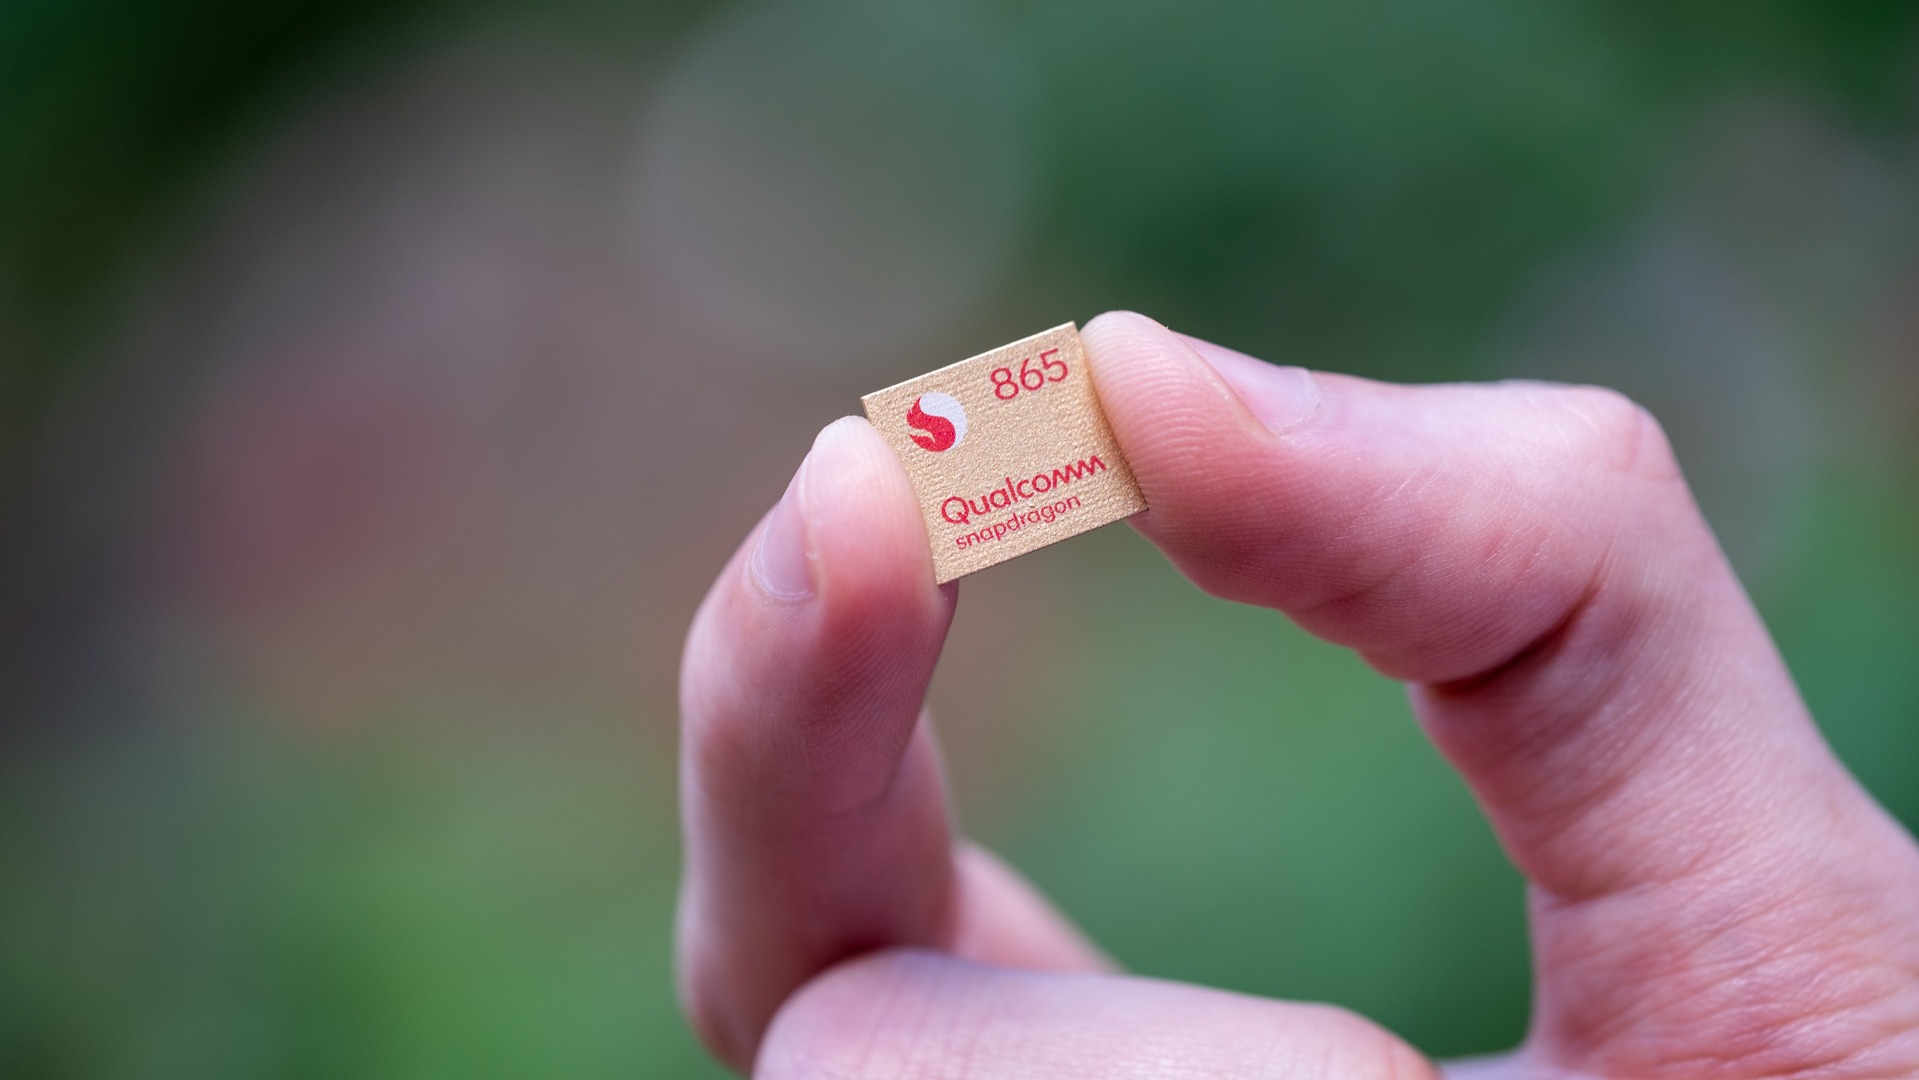 Qualcomm Snapdragon 865 in hand